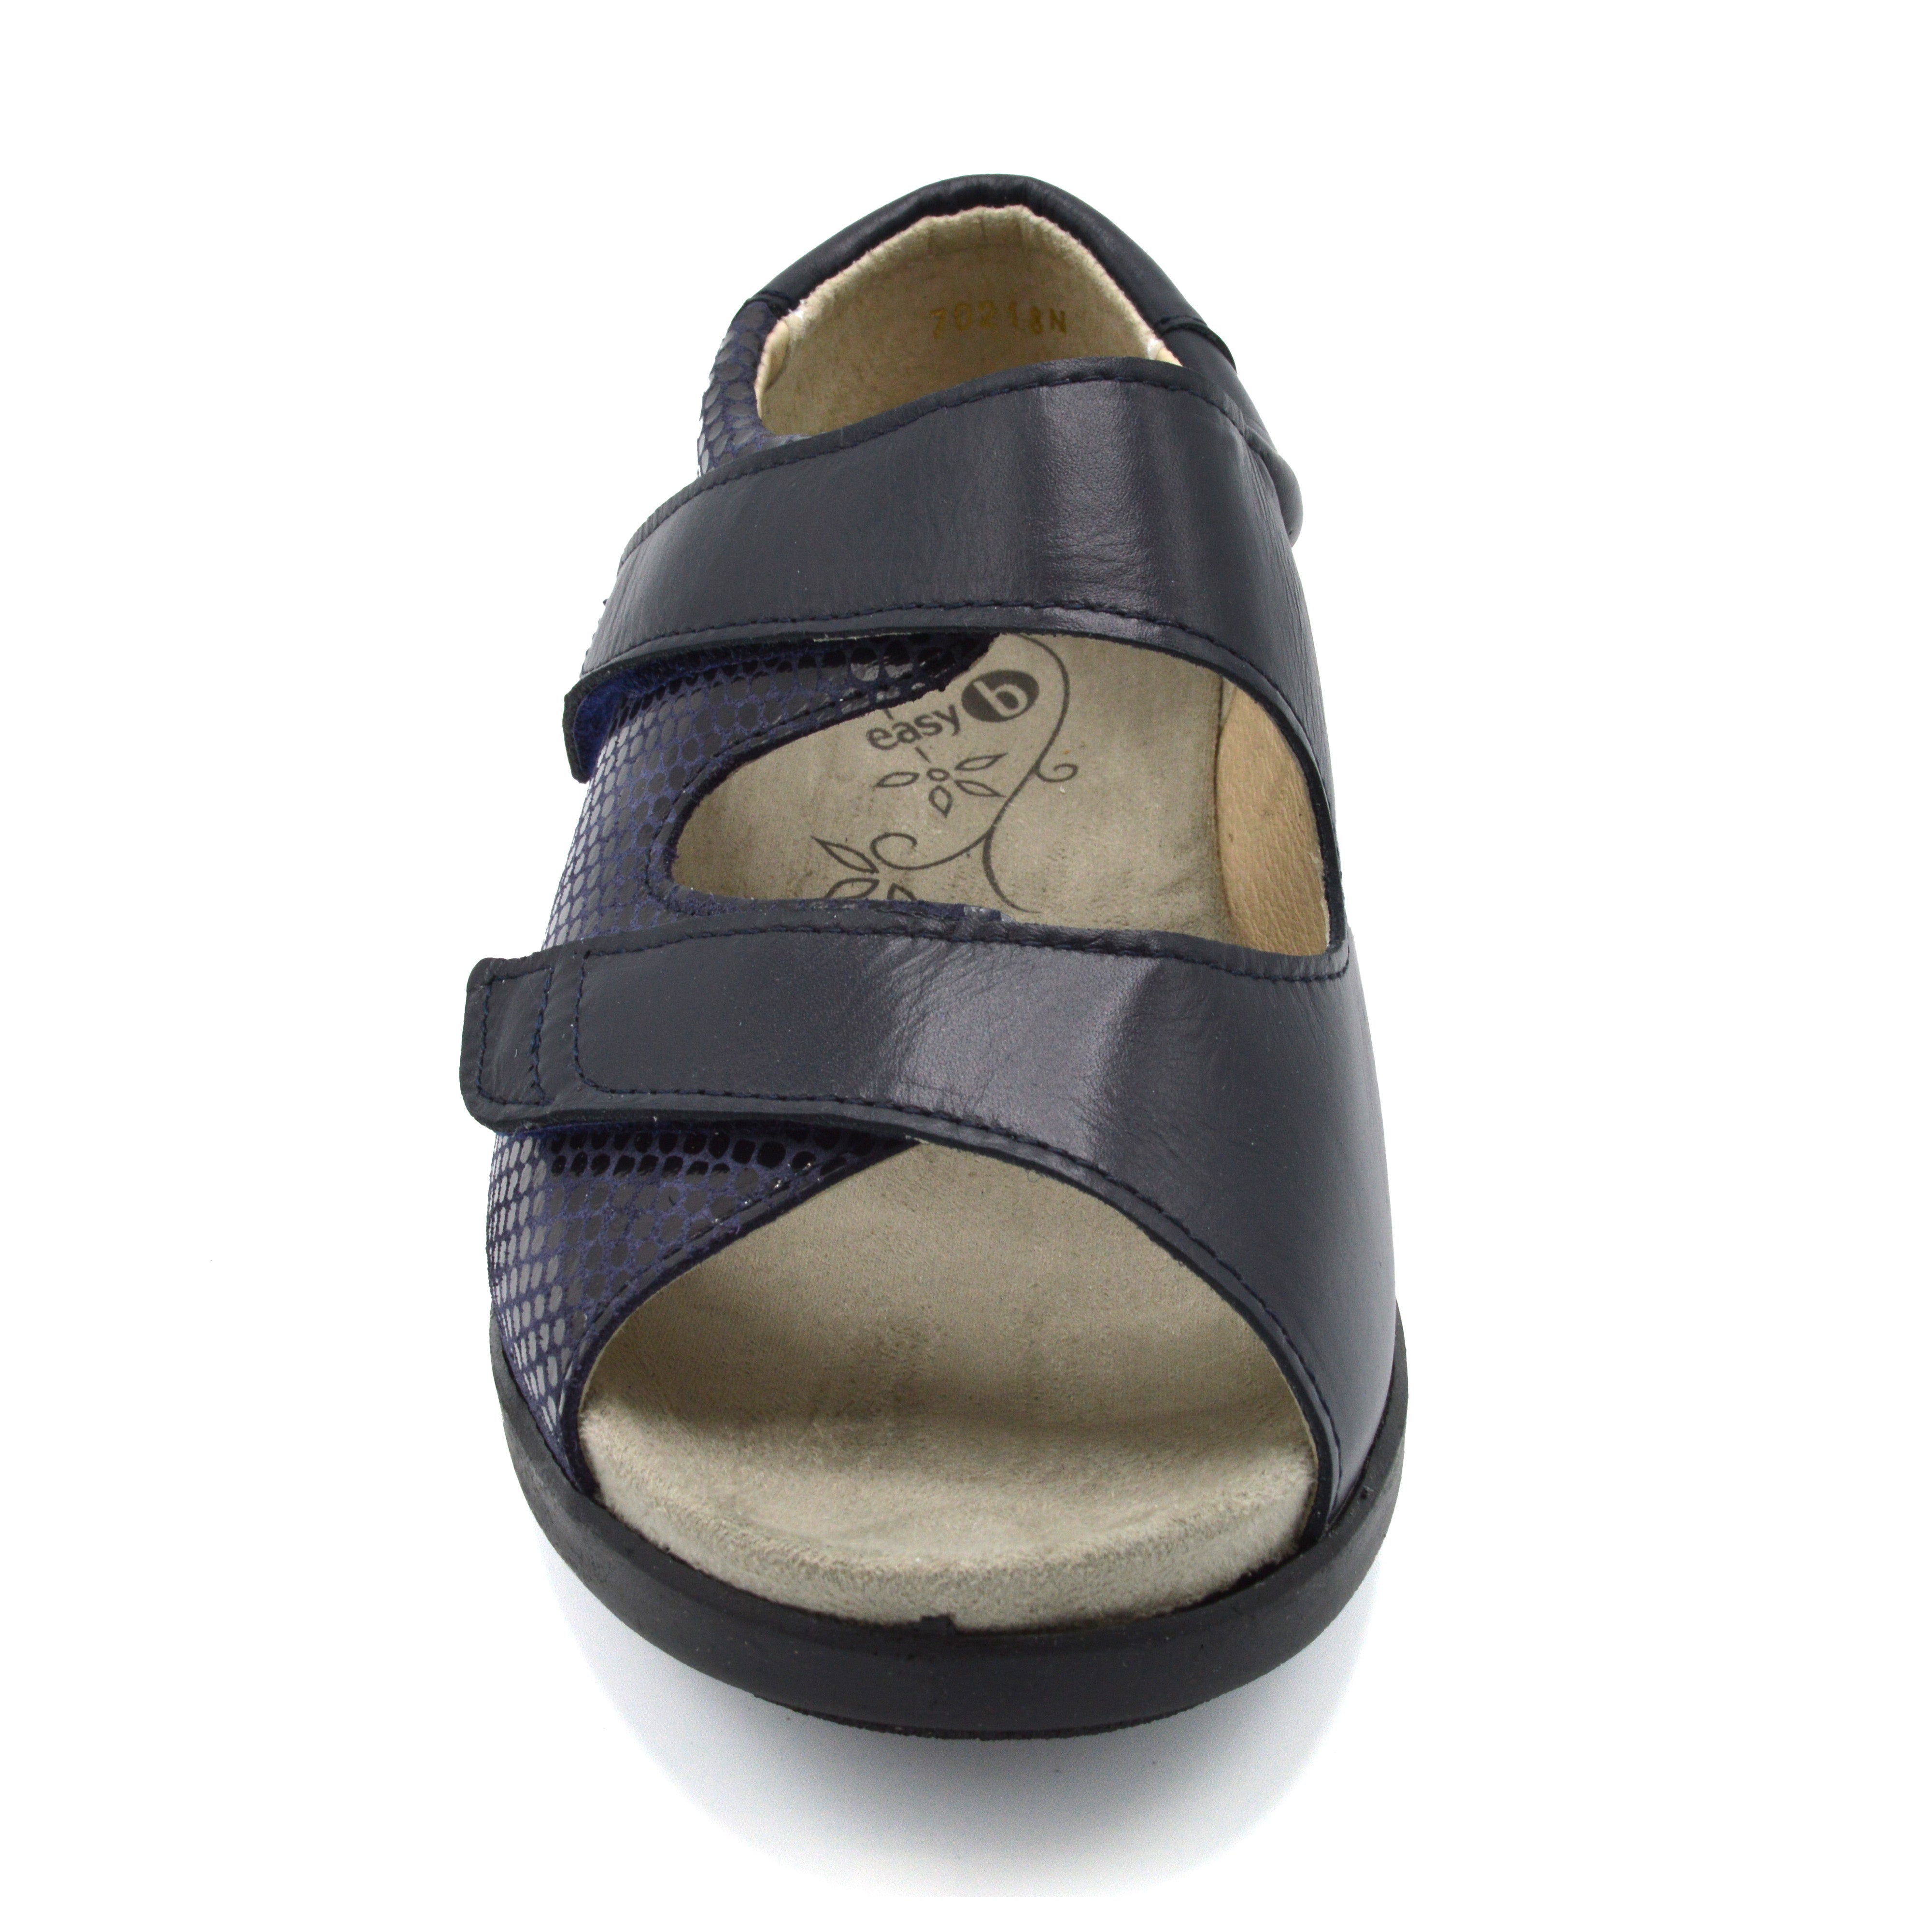 Sandal With Adjustable Velcro Strap For Swollen Feet